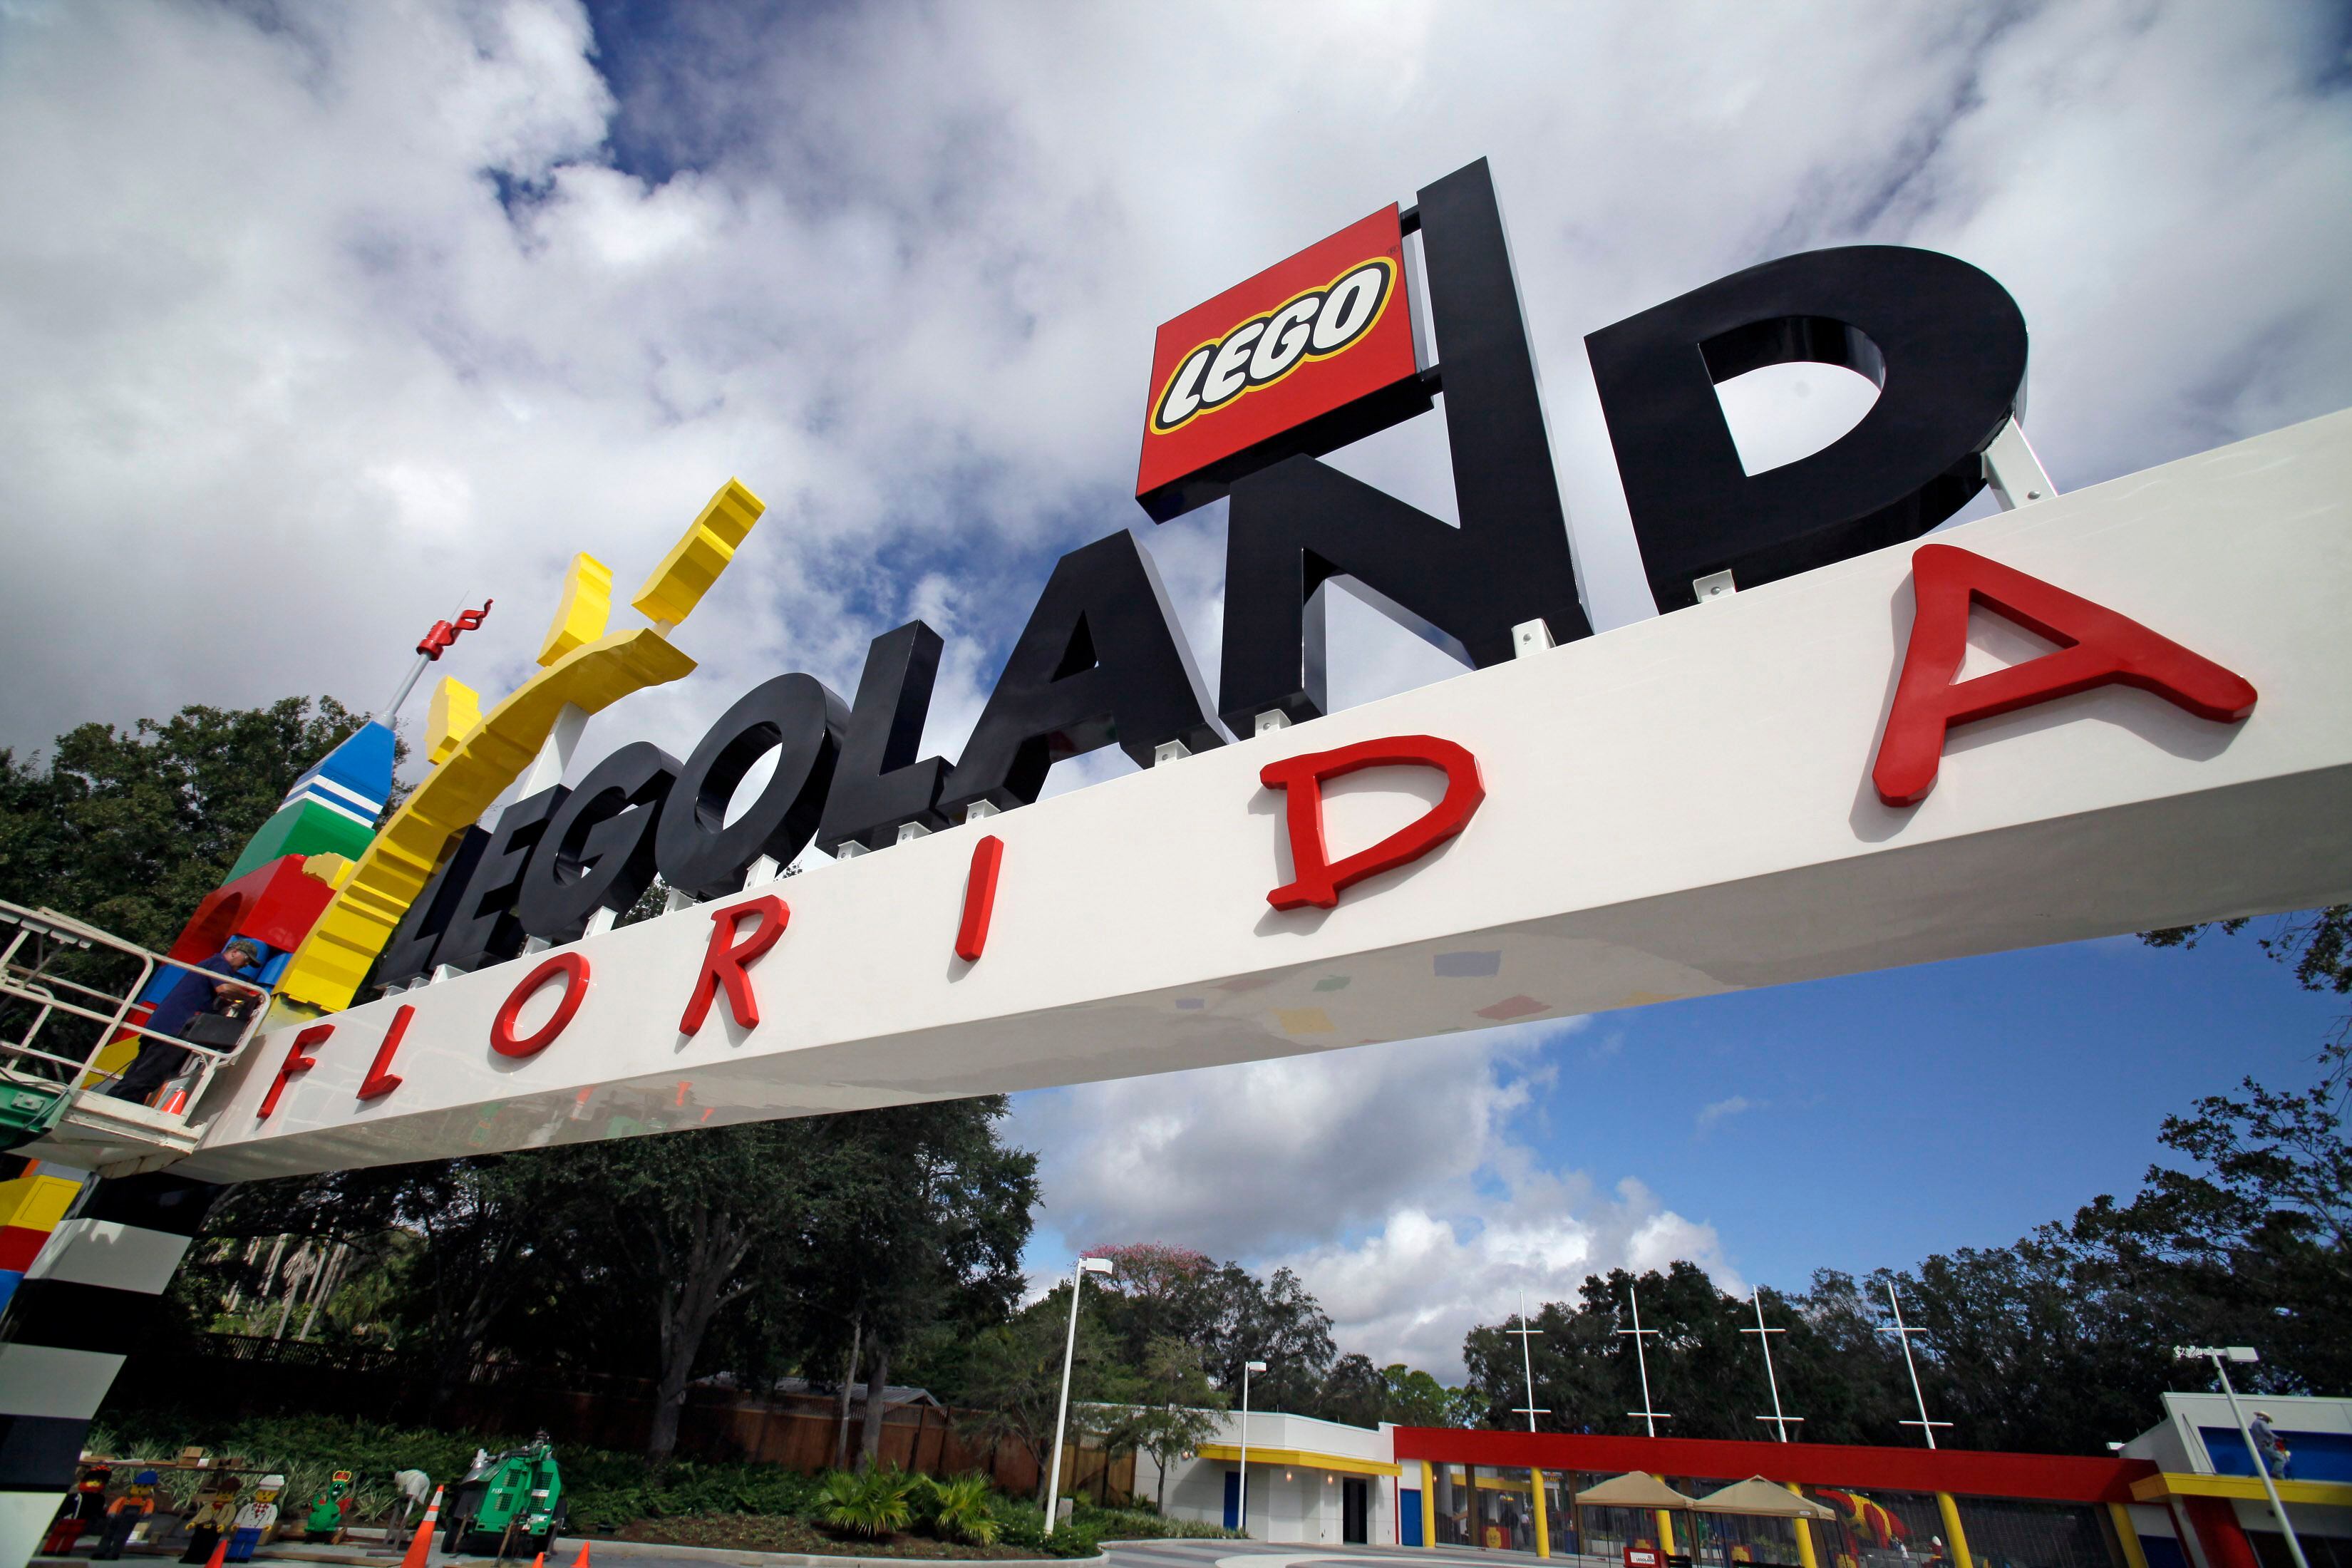 Legoland Florida donating $20 from every ticket to Hurricane Ian relief efforts